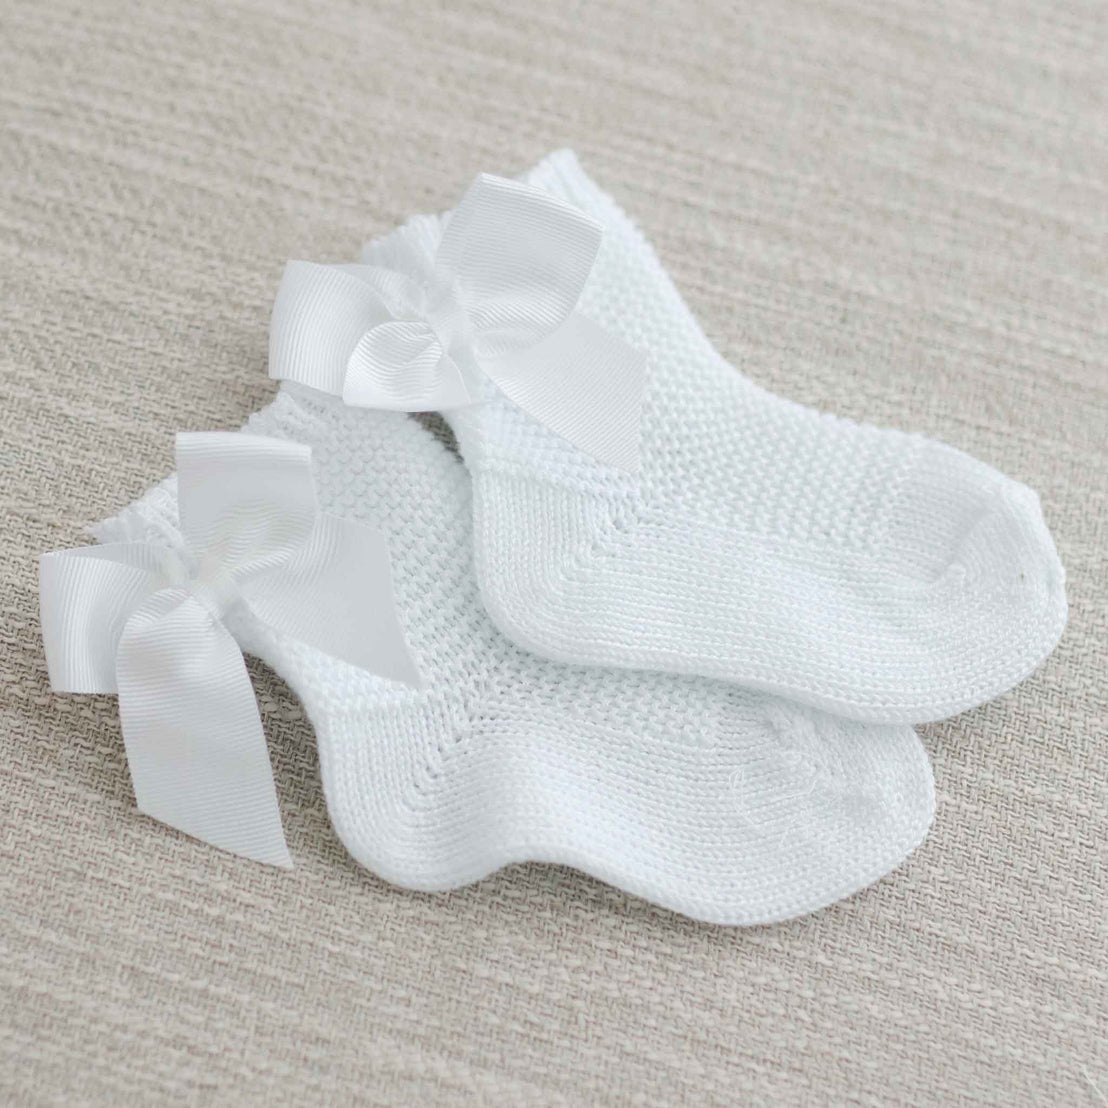 A pair of Garter Stitch Socks with Bow in white, featuring delicate lace trim and grosgrain ribbons, neatly placed on a textured beige fabric background.